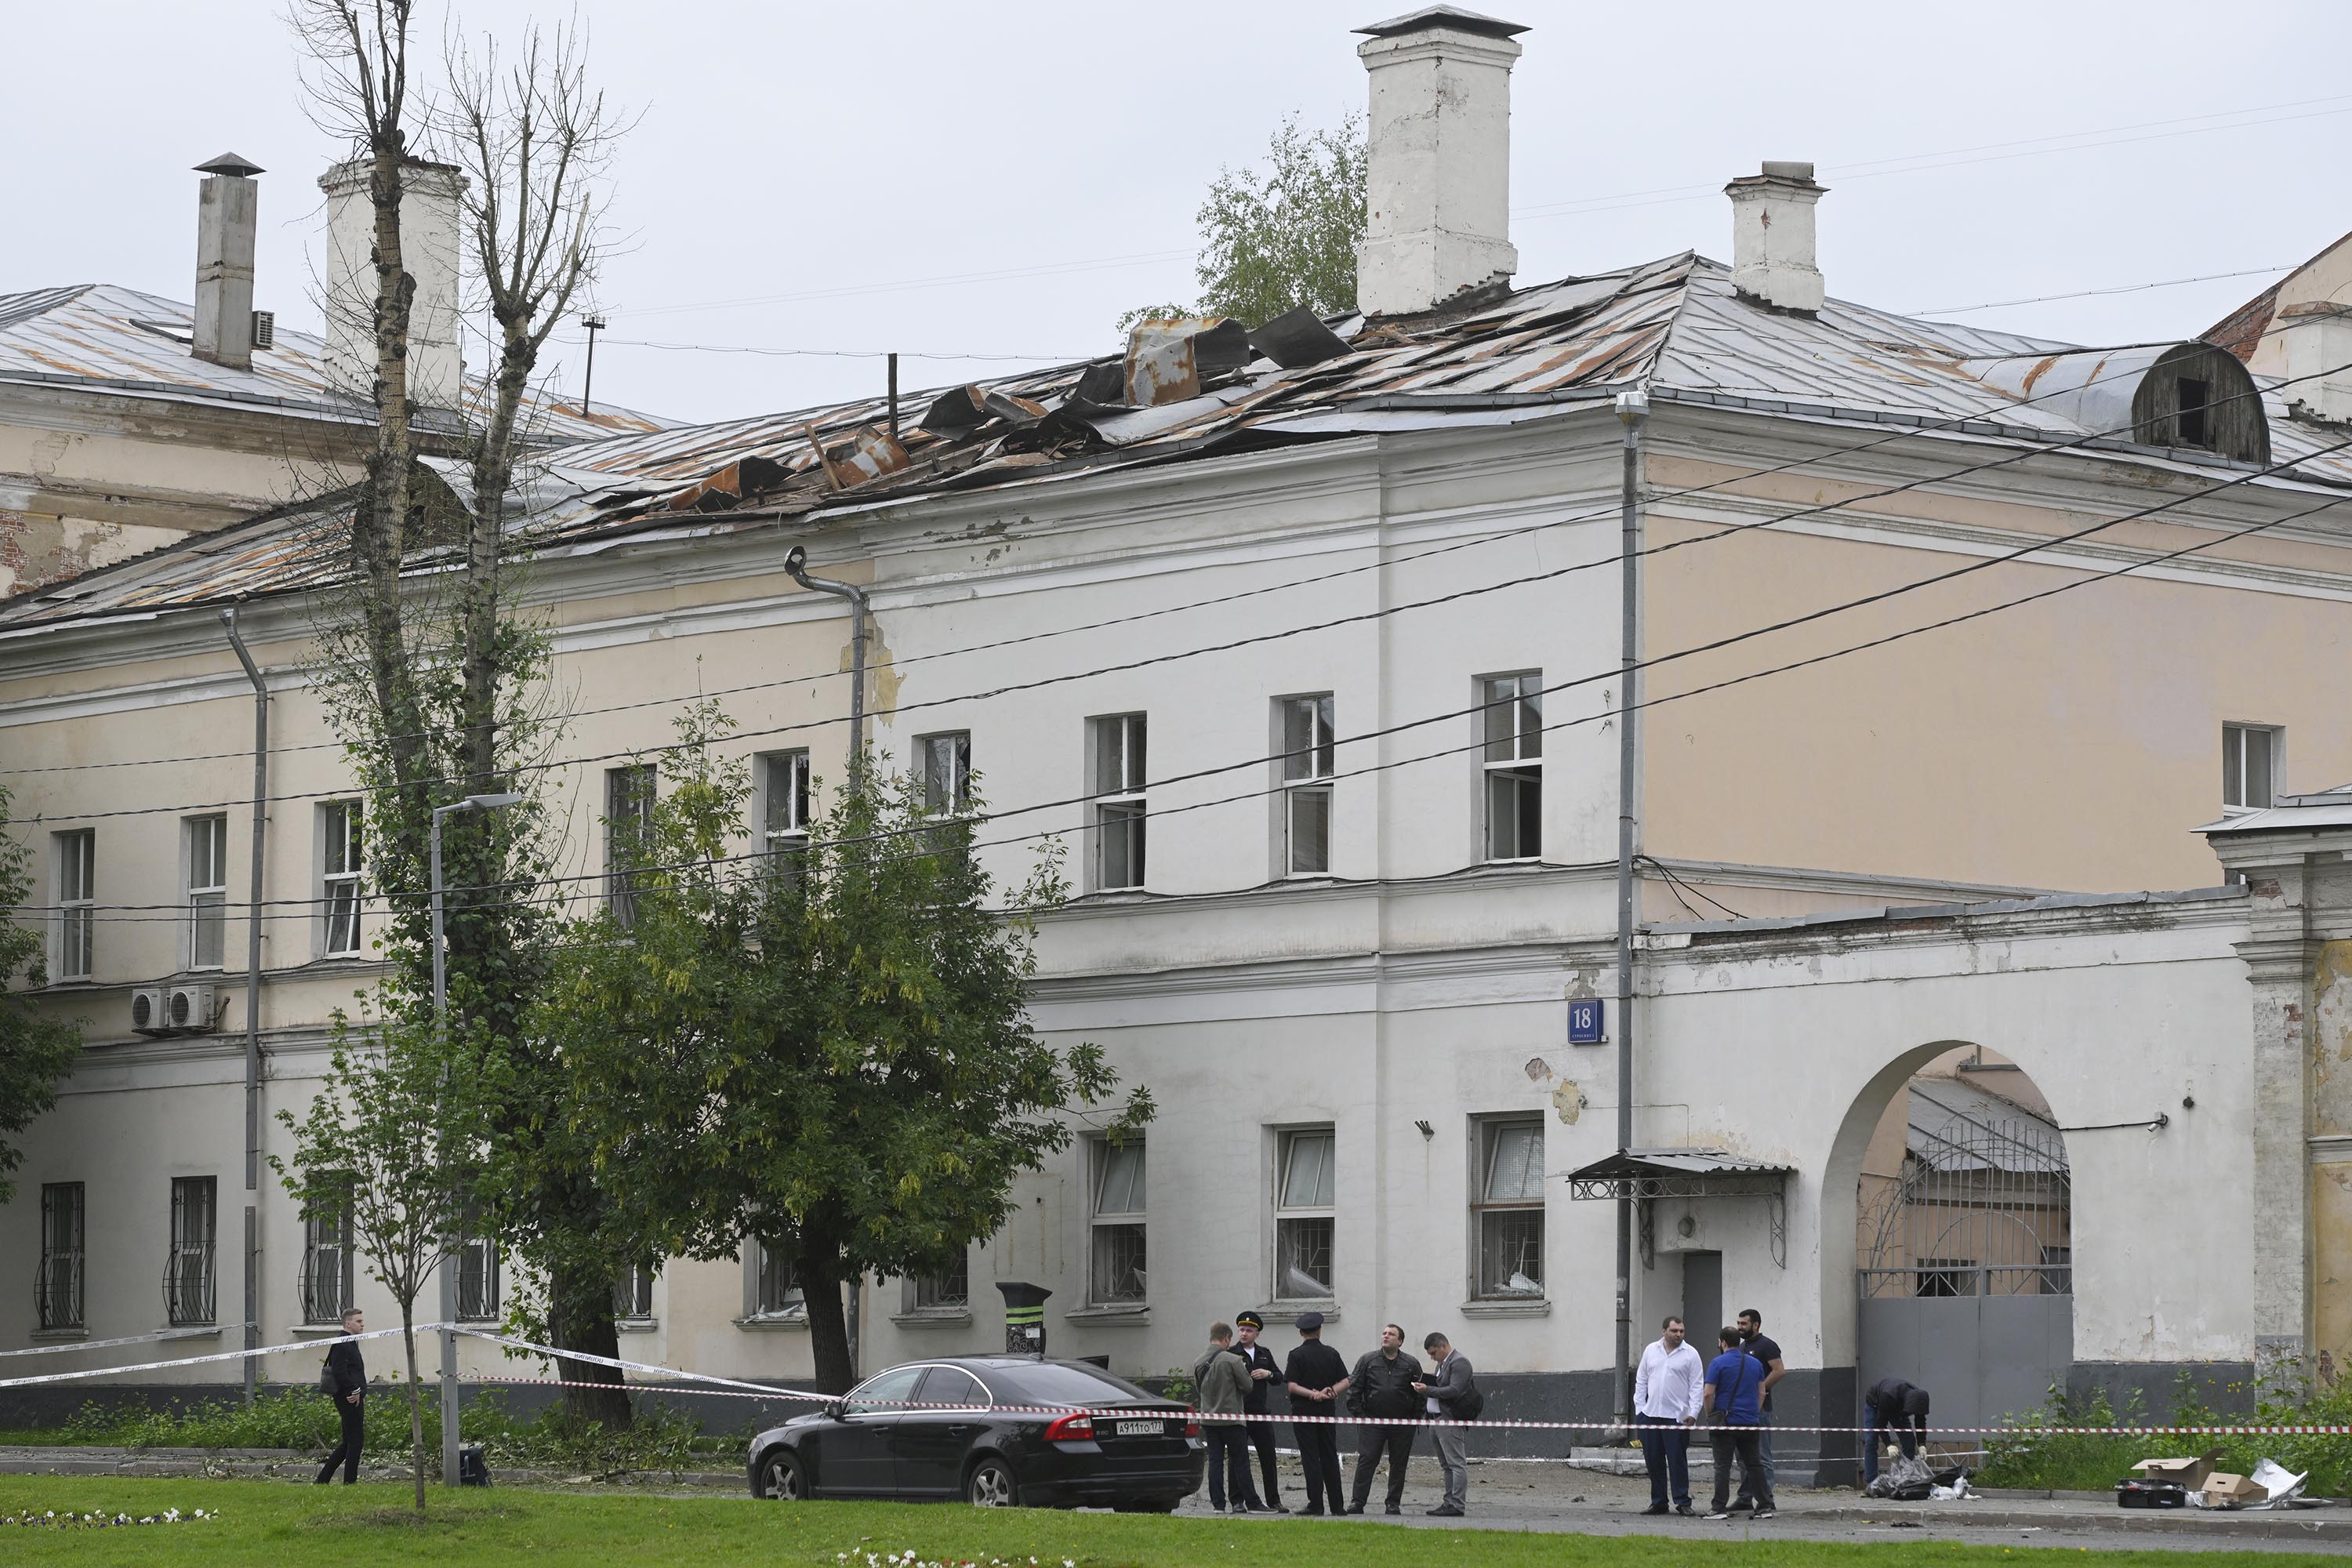 Investigators examine an area next to a damaged building after a reported drone attack in Moscow, Russia, on Monday, July 24.